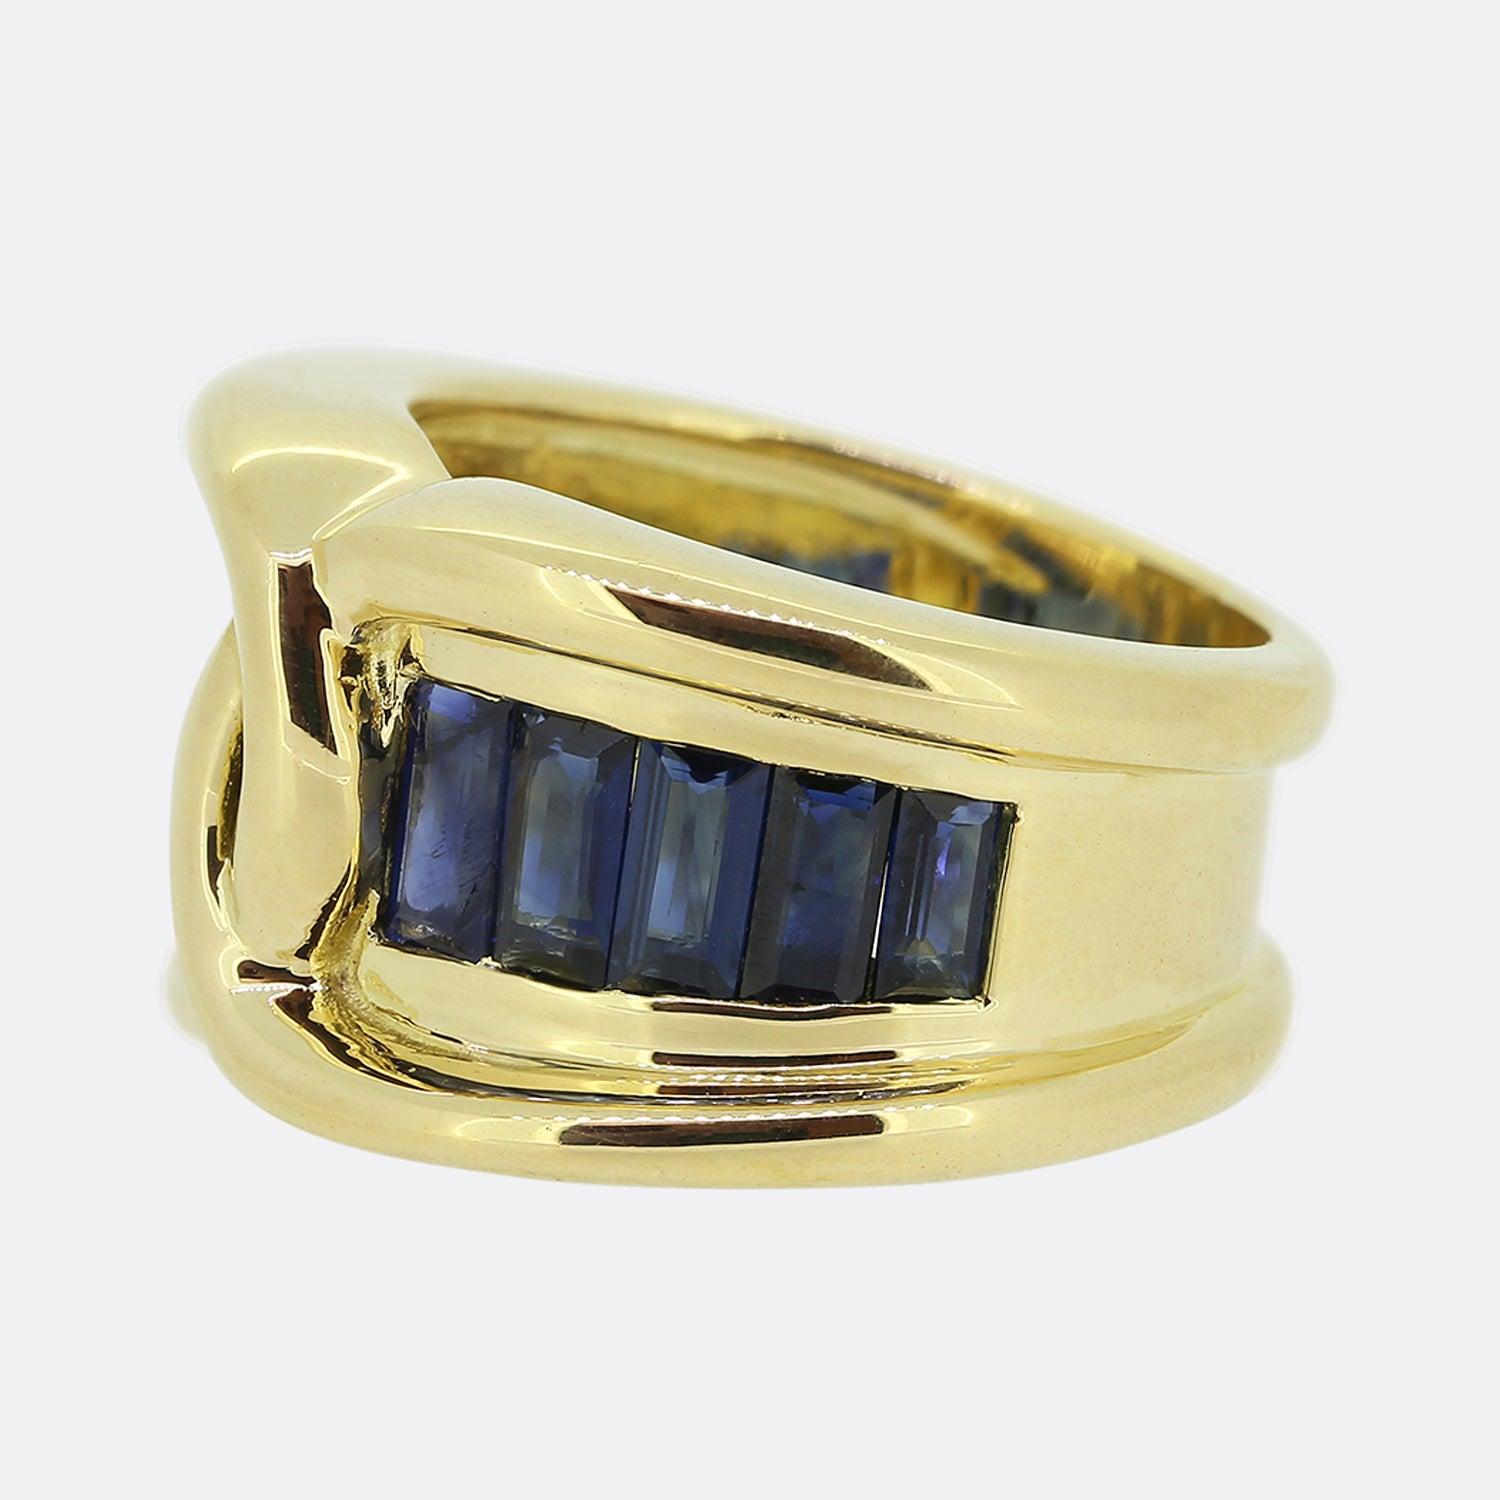 Here we have a large vintage sapphire knot ring. This wide piece has been crafted from 18ct yellow gold with the face showcasing an interwoven motif. This centralised design is flanked on either side by a graduating row of rub-over set royal blue